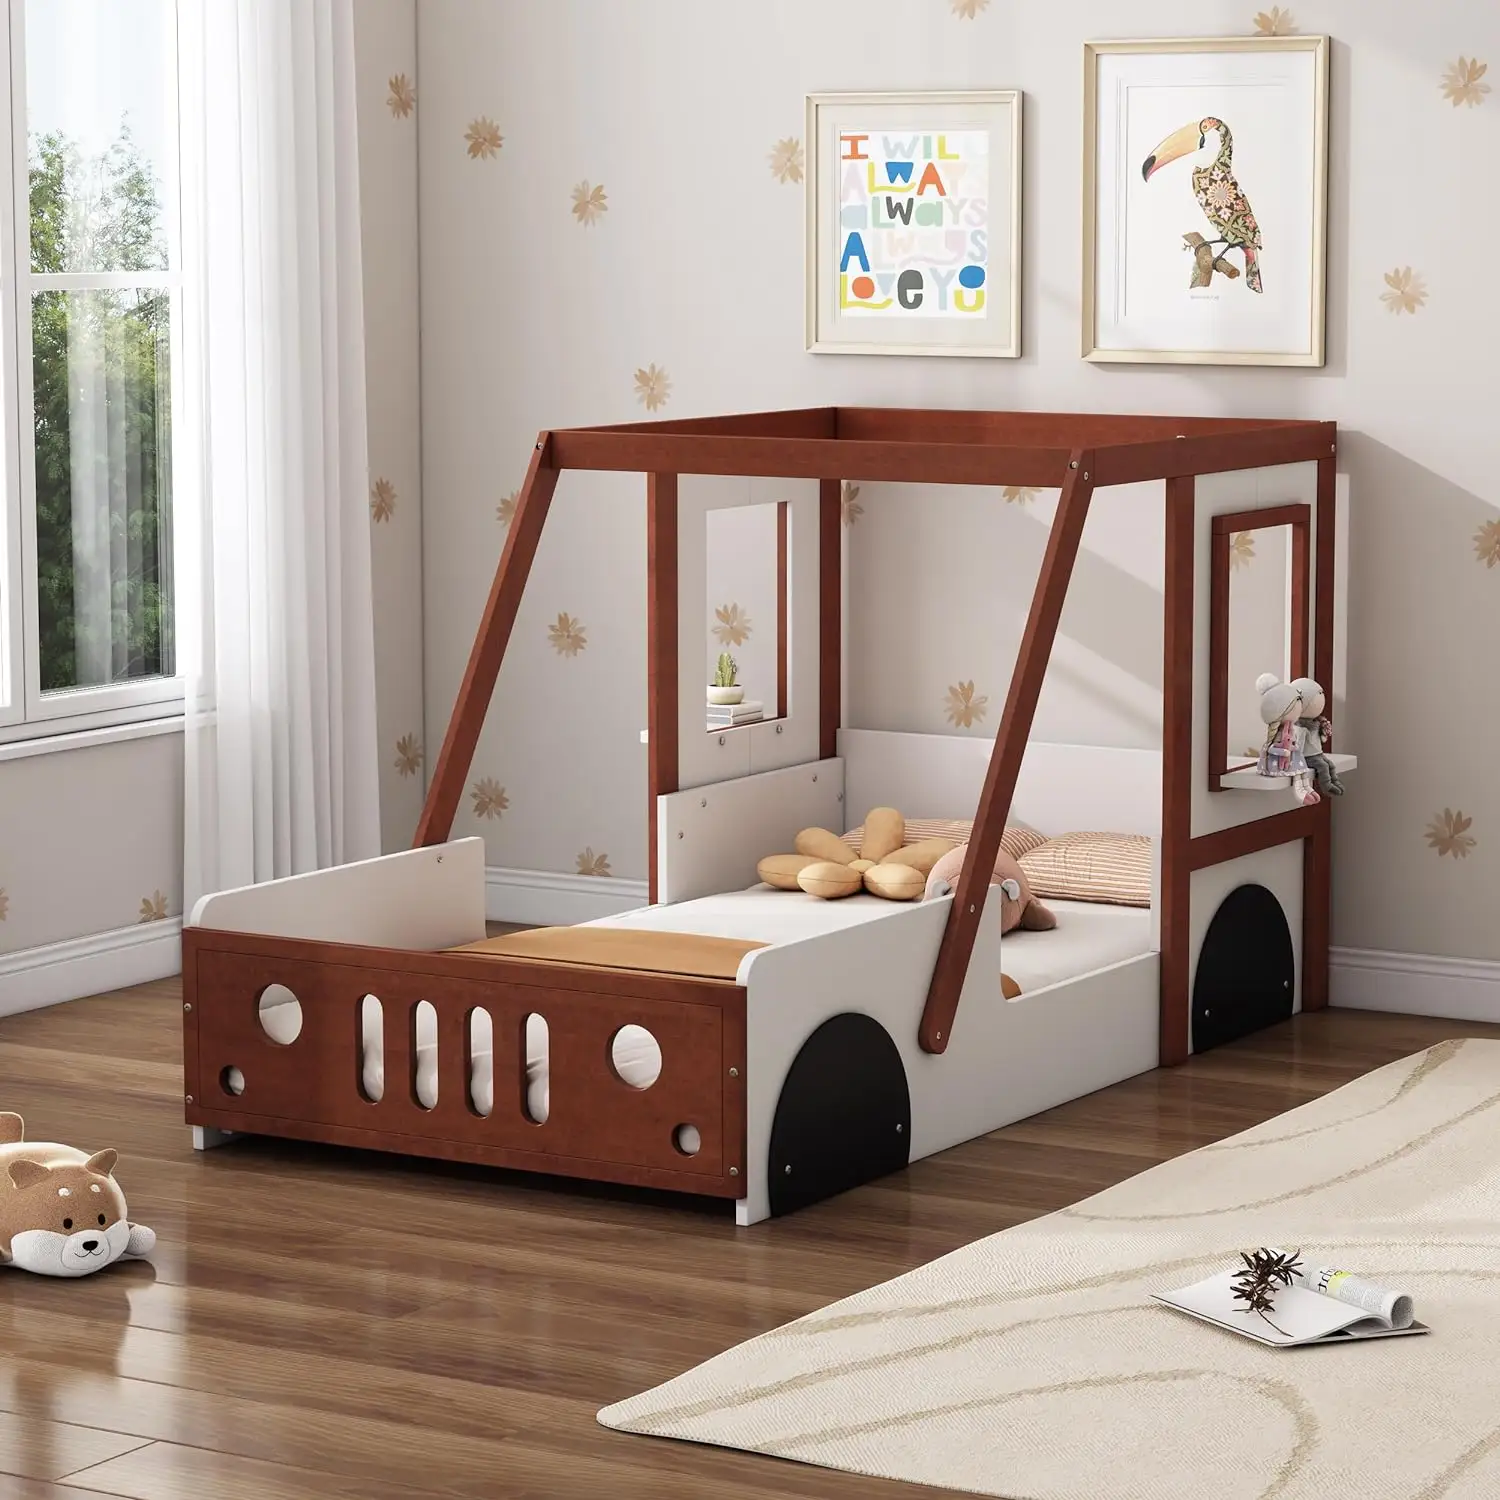 Twin Car Bed Frame for Kids Wood Platform Bed in Car-Shaped with Wheels and Door Design Boys Girls Fun Play